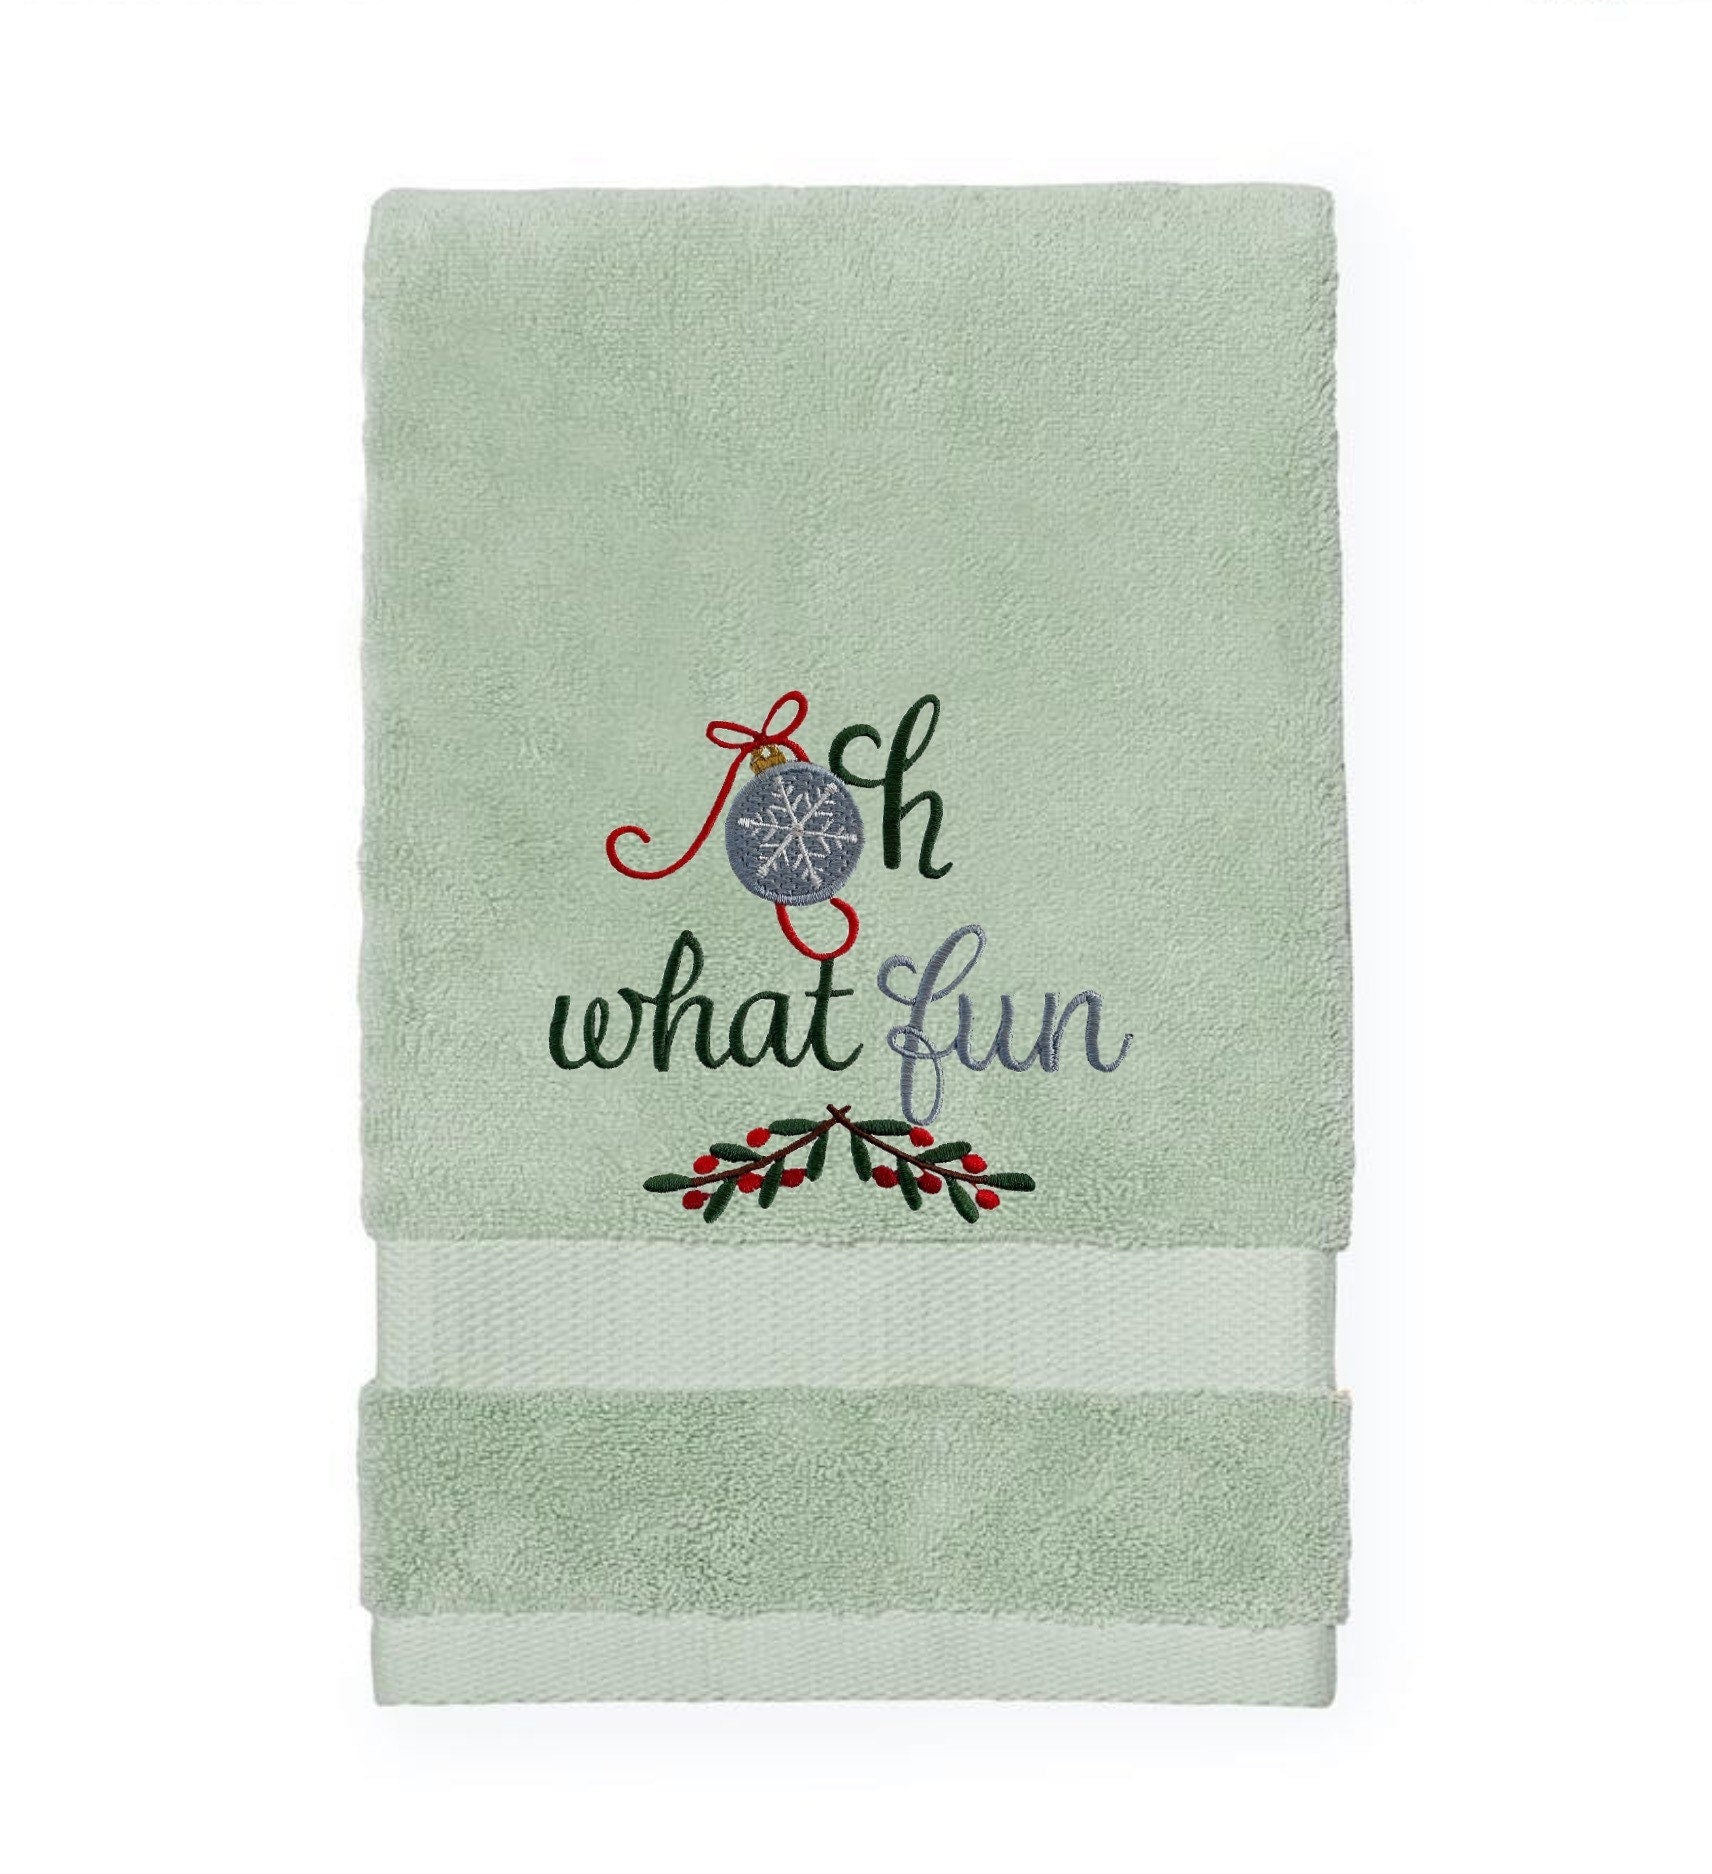 Embroidered Winter Christmas Towels “Oh What Fun” Bath Towels. 100% Plush Cotton Hand or Fingertip Towel